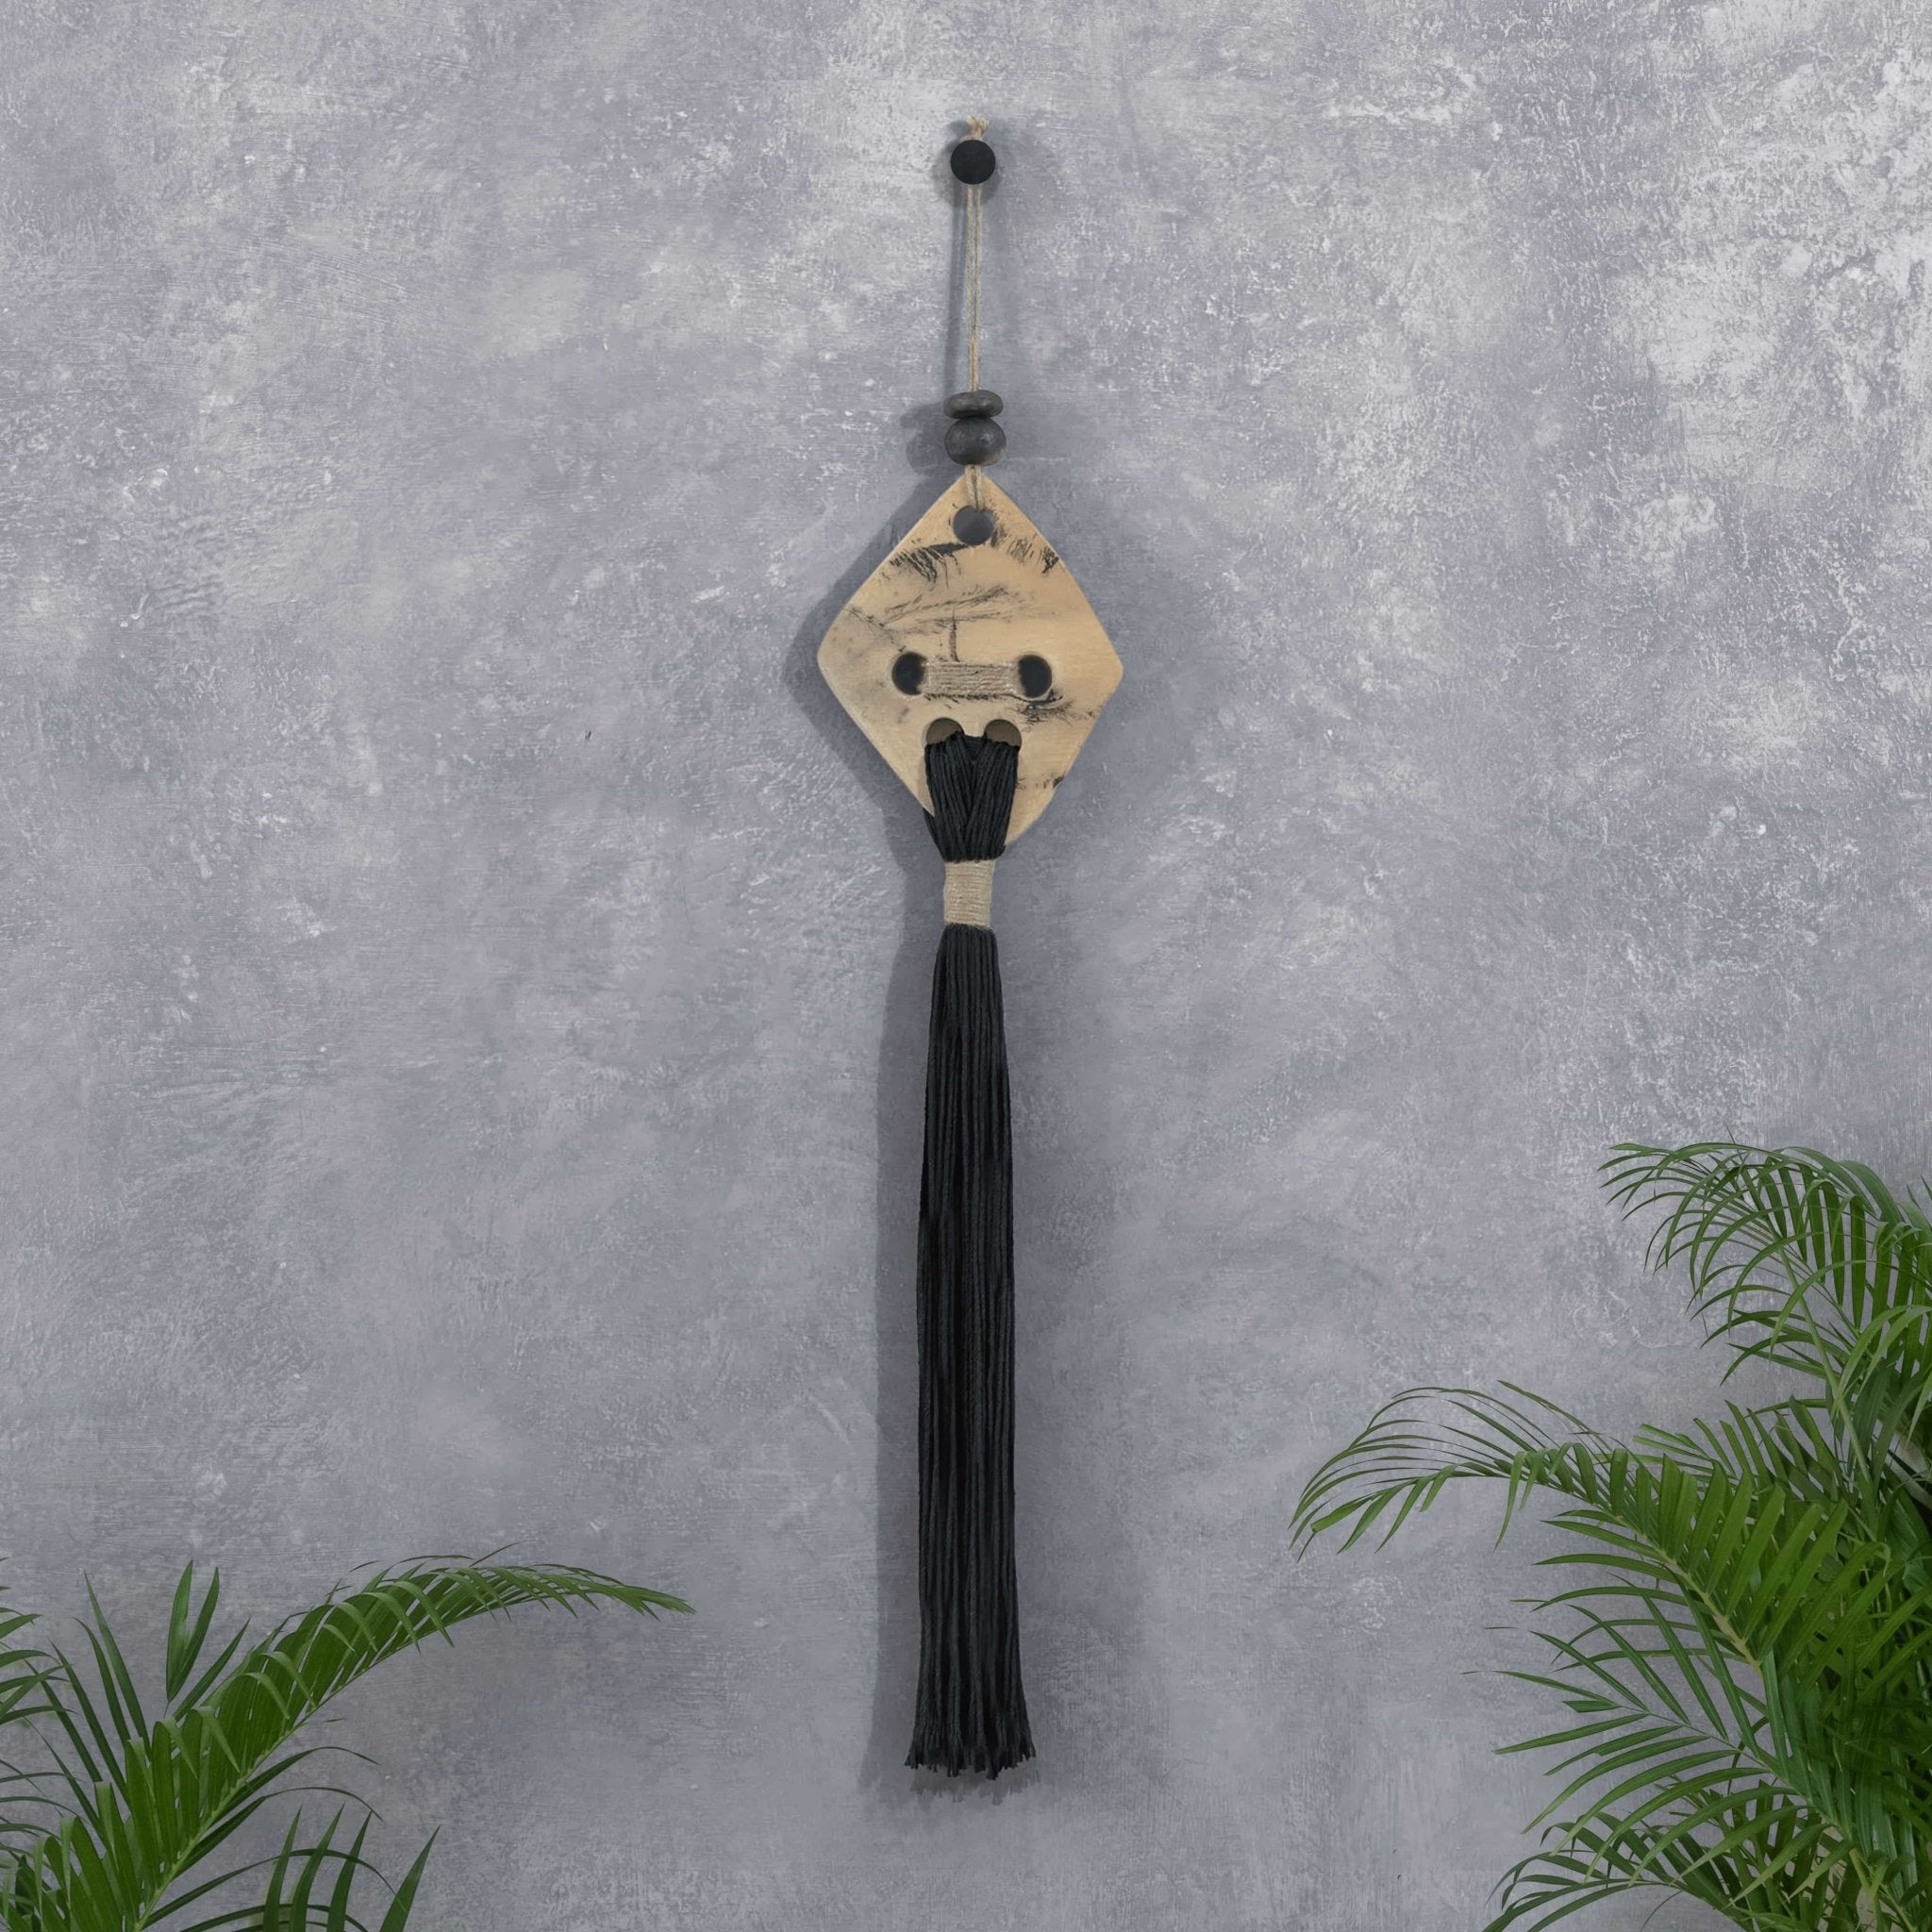 Black and Beige Ceramic Macrame Wall Hanging by Máak-An - Wool+Clay